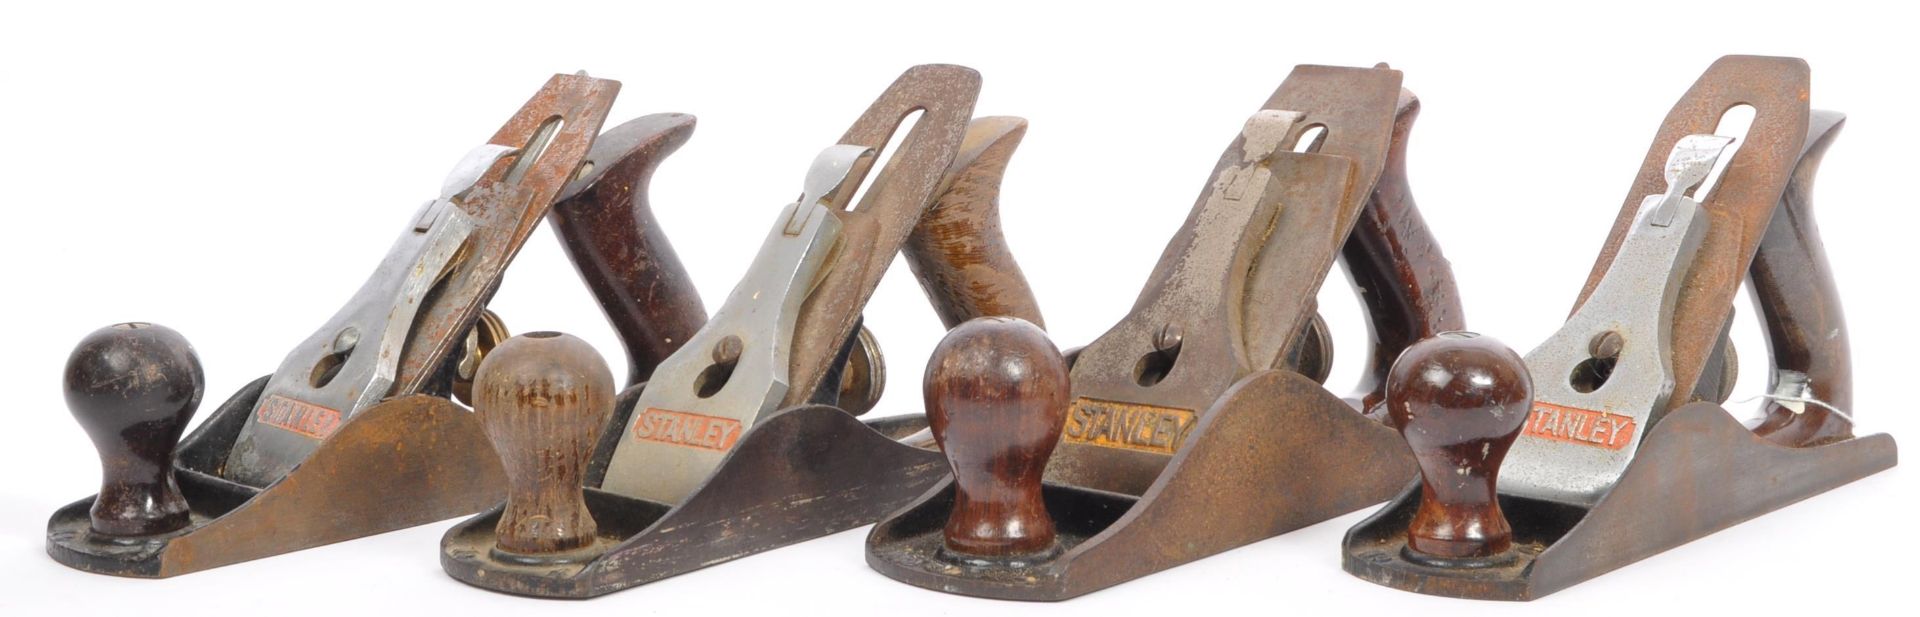 FOUR VINTAGE 20TH CENTURY STANLEY WOOD BENCH PLANES